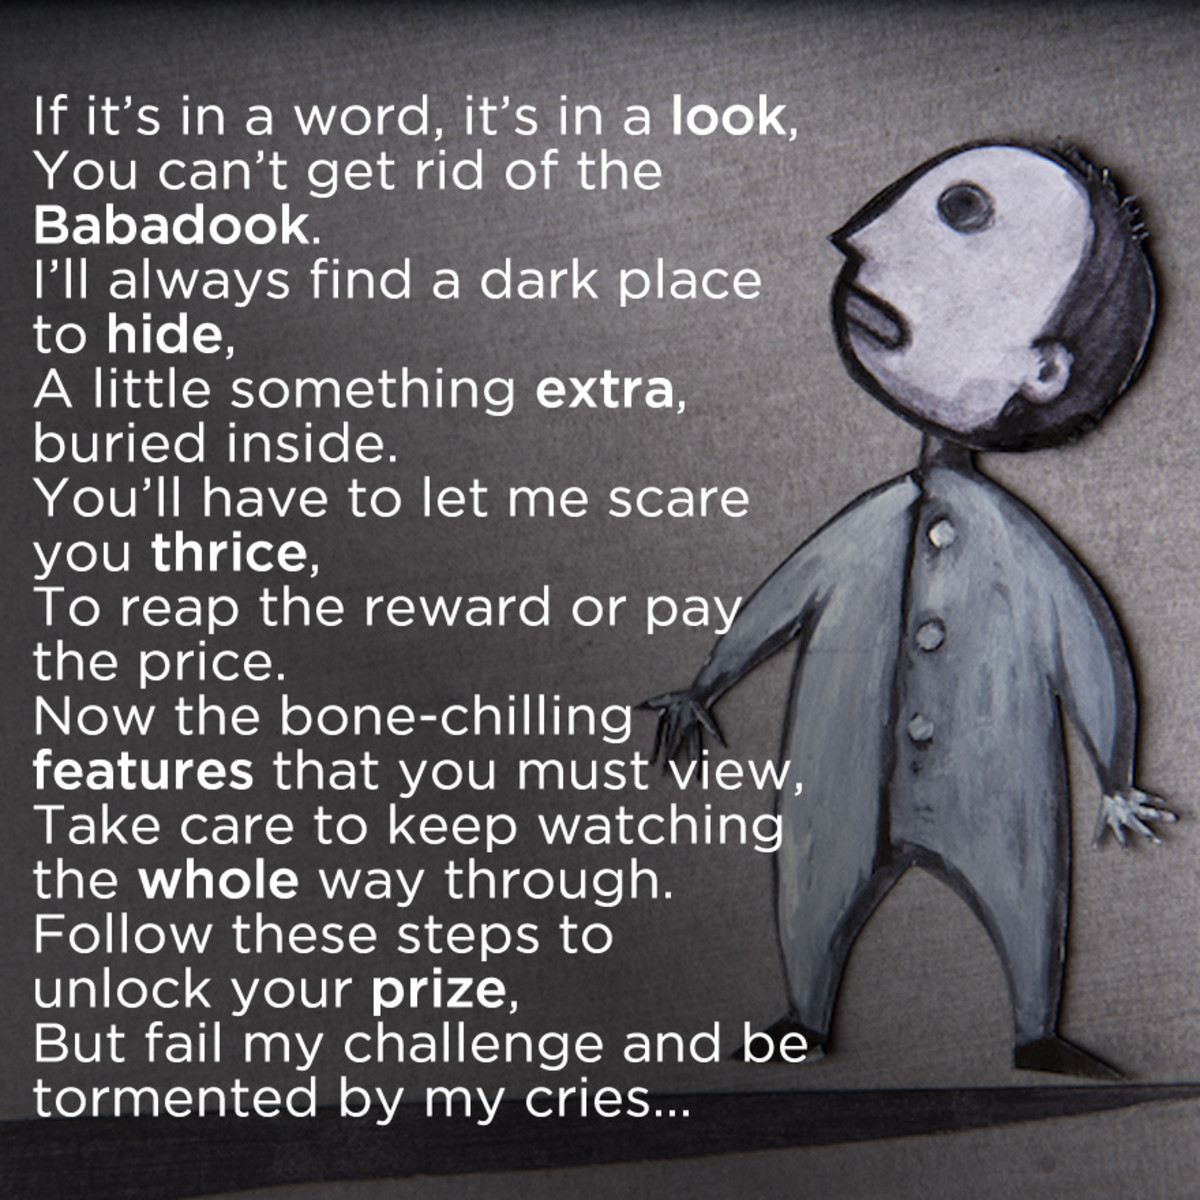 the-babadook-film-review